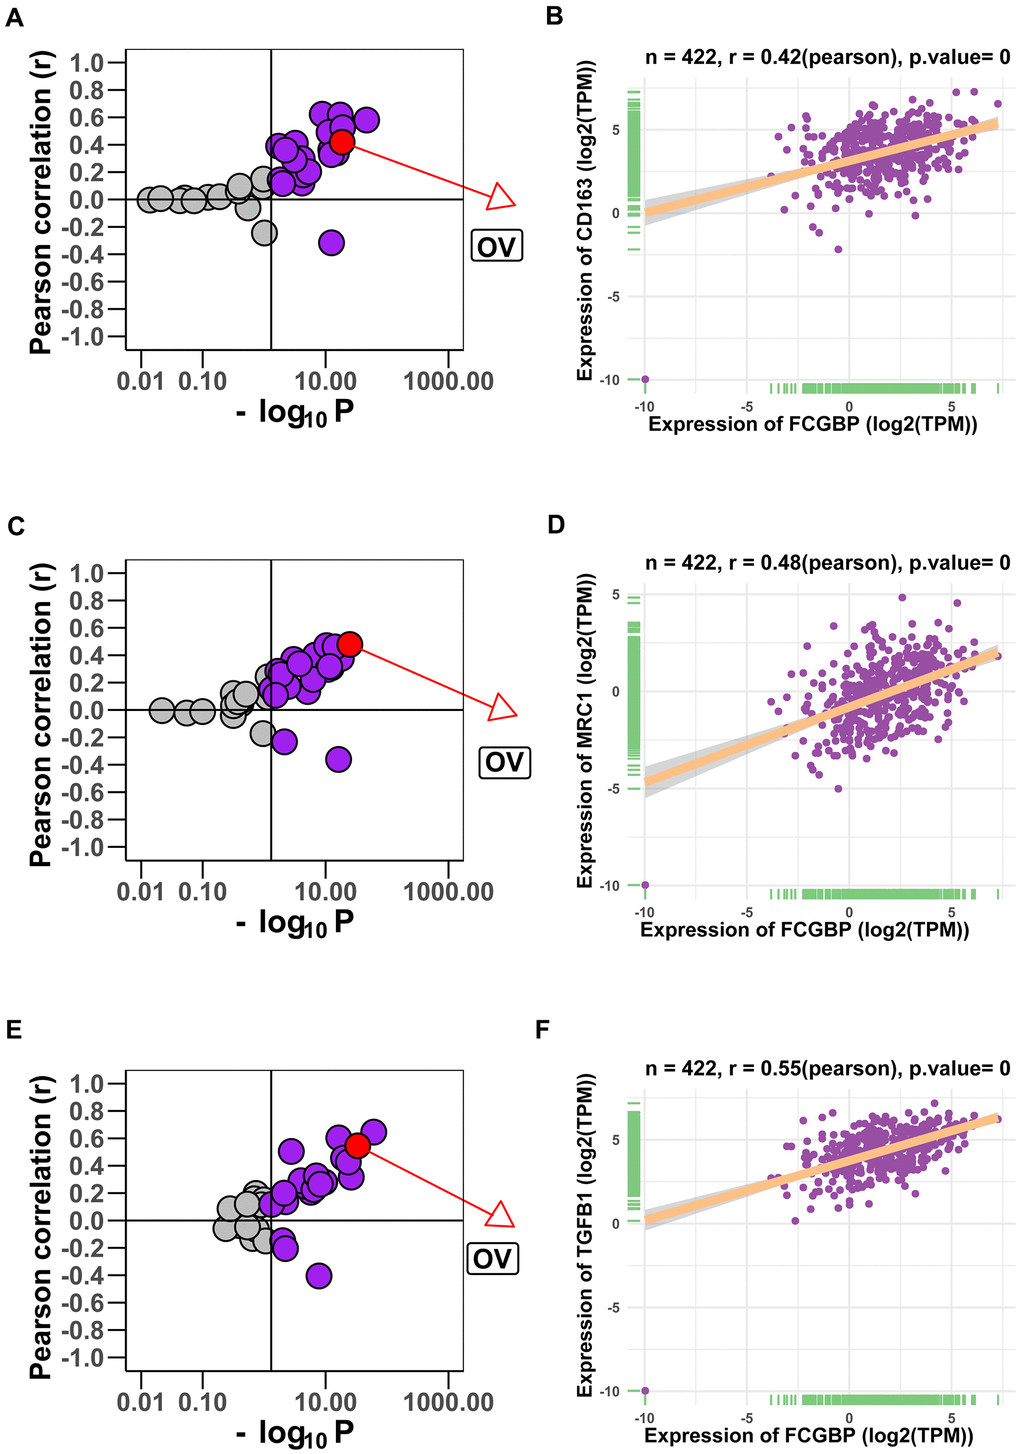 Correlation between FCGBP expression and gene markers of M2-like macrophages. (A, B) Correlation between FCGBP expression and CD163 in pan-cancer (A) and ovarian cancer (B). Each circle represents a type of cancer; purple circles represent meaningful correlations (Pearson p C, D) Correlation between FCGBP expression and MRC1 in pan-cancer (C) and ovarian cancer (D). (E, F) Correlation between FCGBP expression and TGFB1 in pan-cancer (E) and ovarian cancer (F).